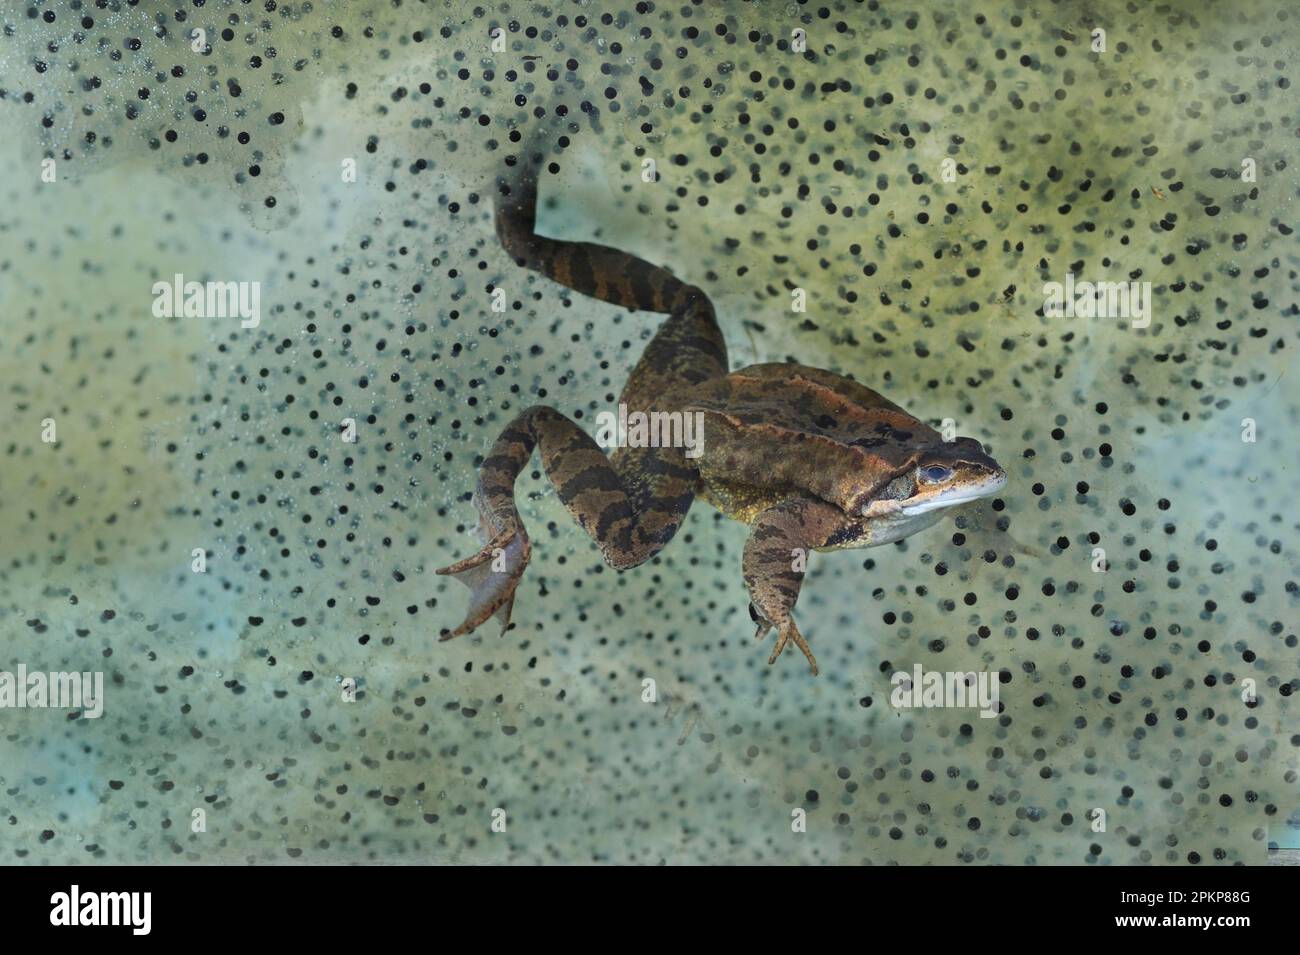 Common common frog (Rana temporaria) adult swimming underwater surrounded by frogspawn in garden pond, Bentley, Suffolk, England, United Kingdom, Euro Stock Photo